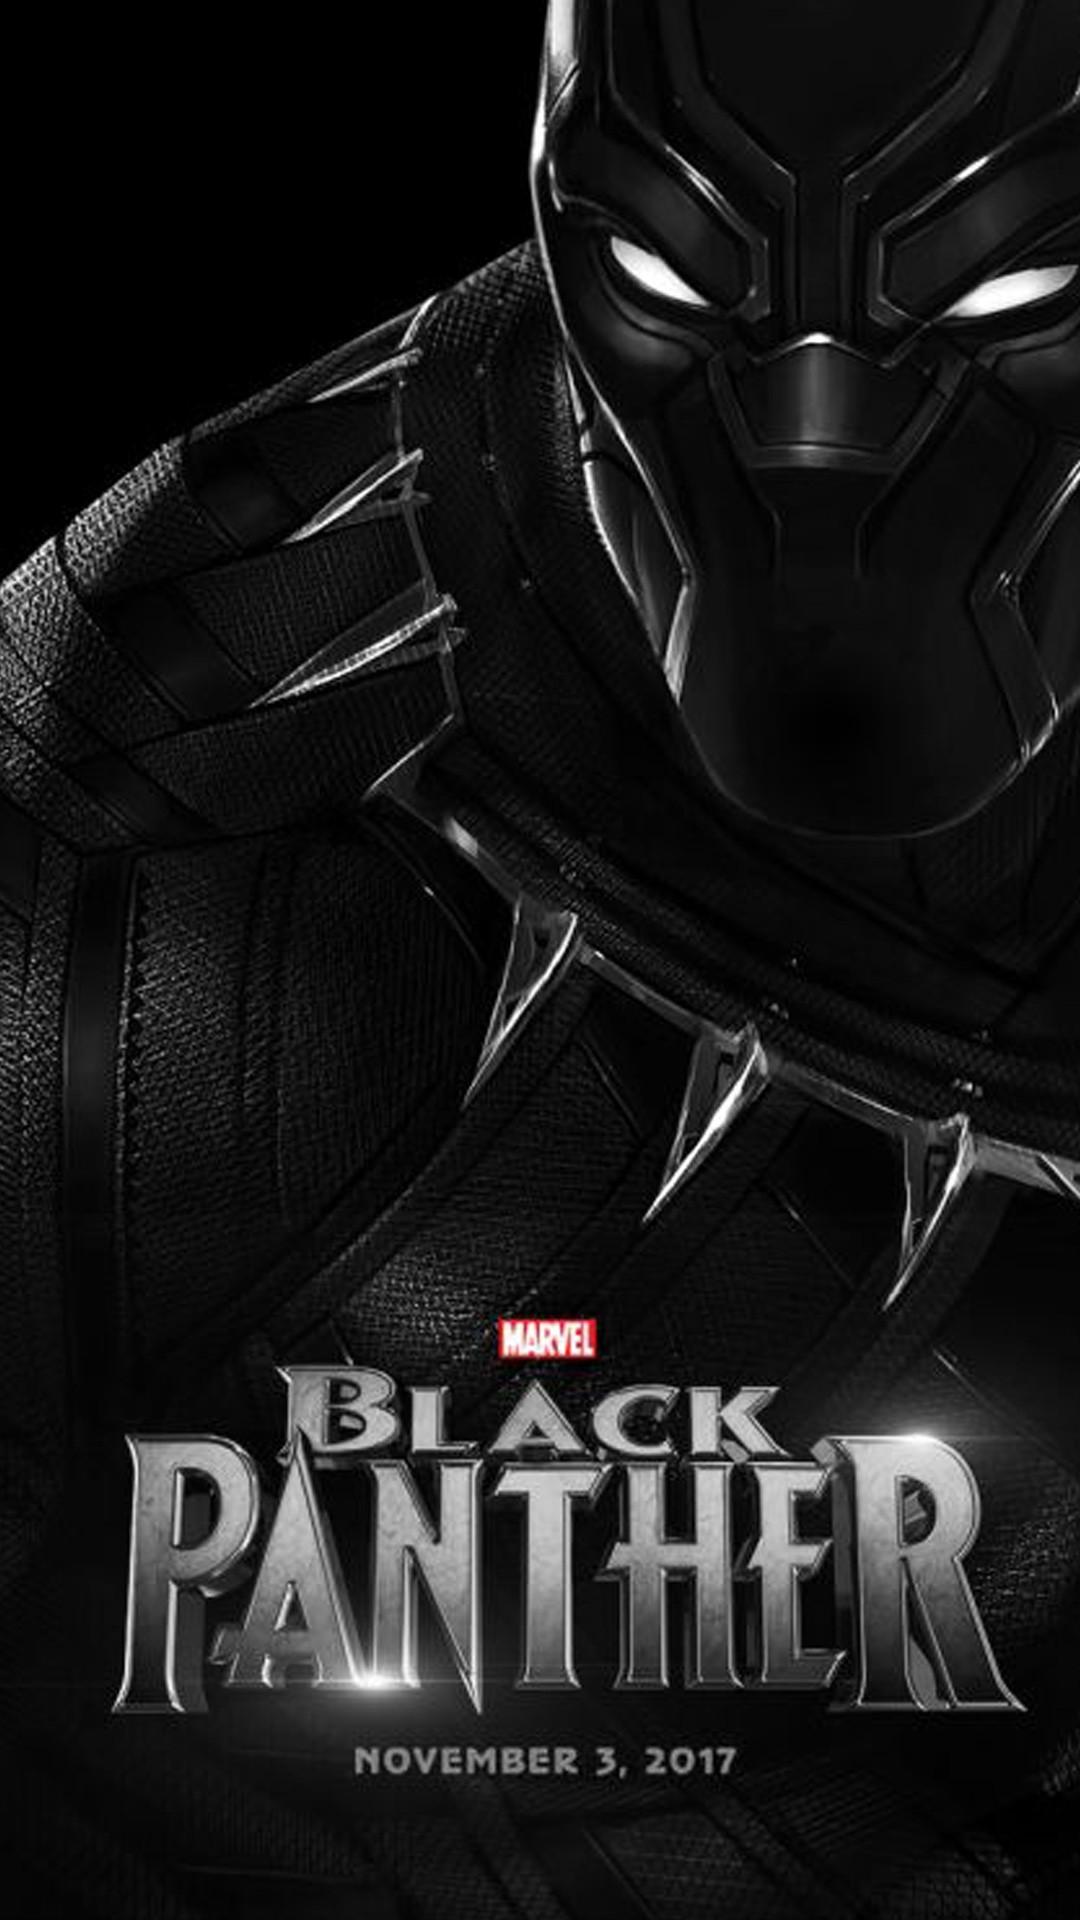 Black Panther Wallpaper background picture